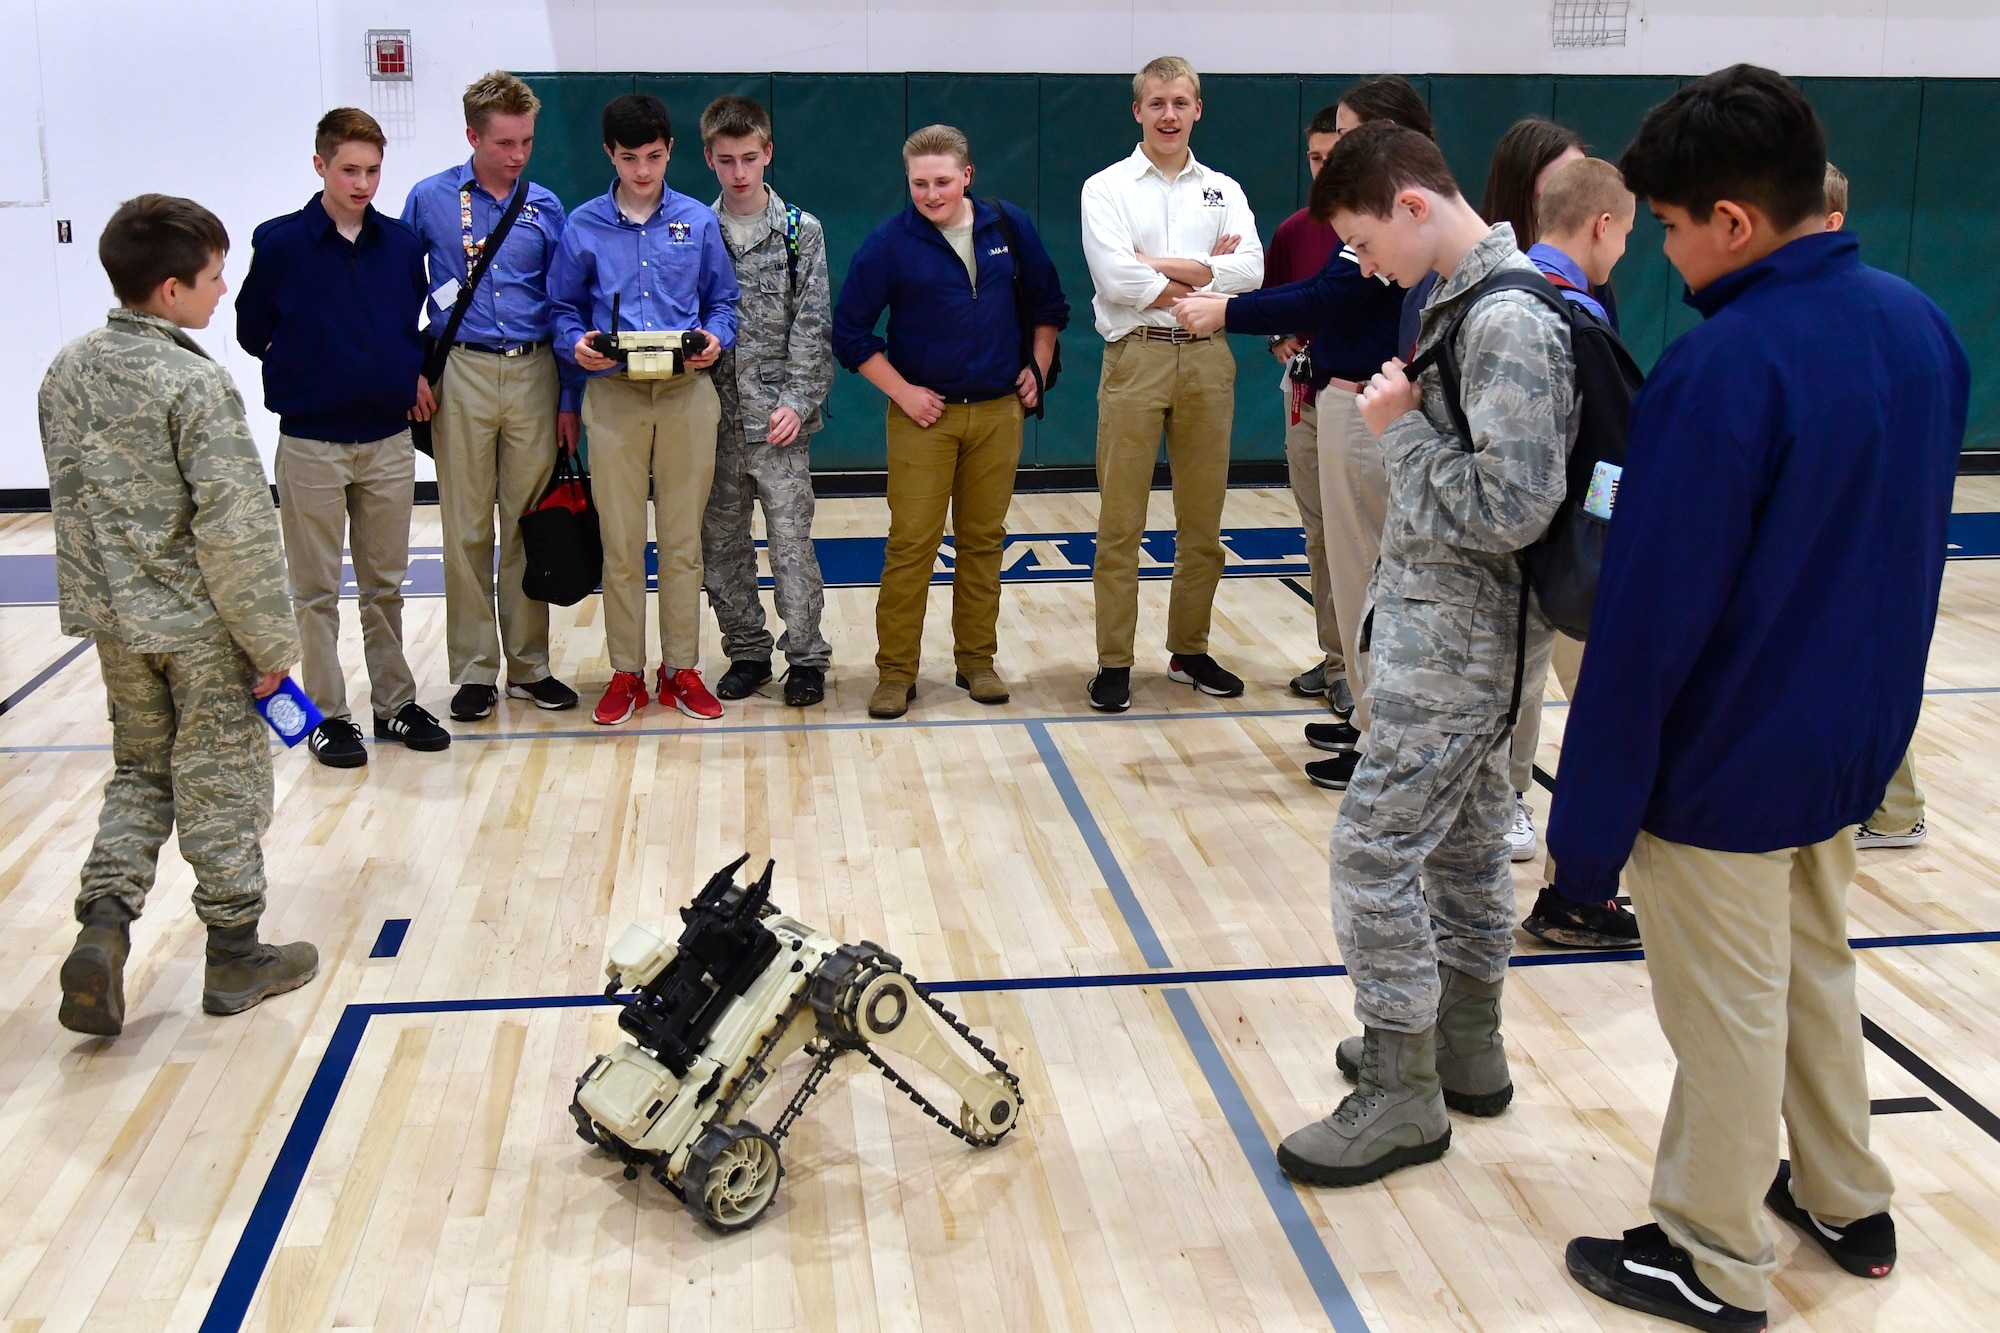 Students at the Utah Military Academy take turns driving a Micro Tactical Ground Robot at the explosive ordnance disposal display during a job fair May 25, 2021, in Riverdale, Utah. Airmen from Hill Air Force Base recently hosted the event at the nearby charter high school to educate and inspire students, as well as promote interest in the possibility of future military careers. (U.S. Air Force photo by Todd Cromar)